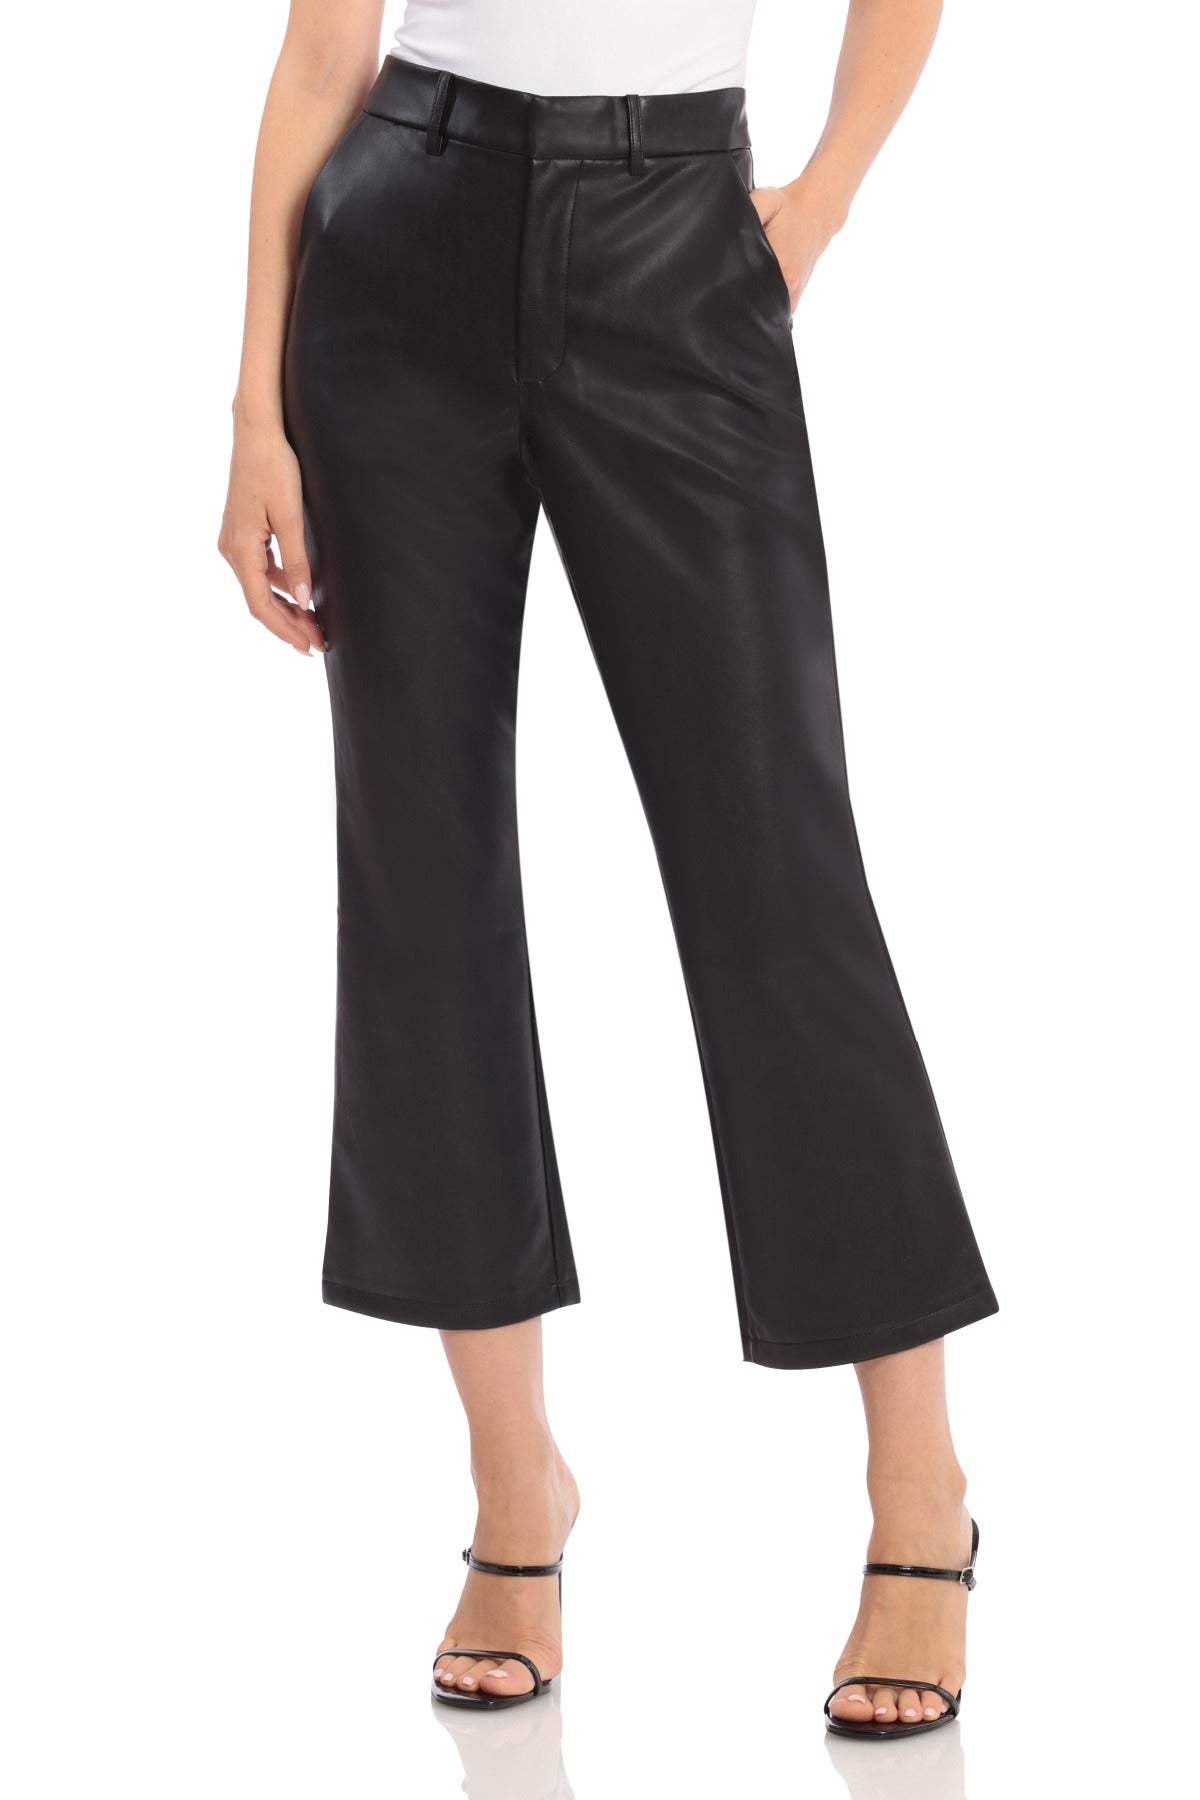 On Sale Cropped Flare Faux Leather Pants Fashion Bottoms for Women Black